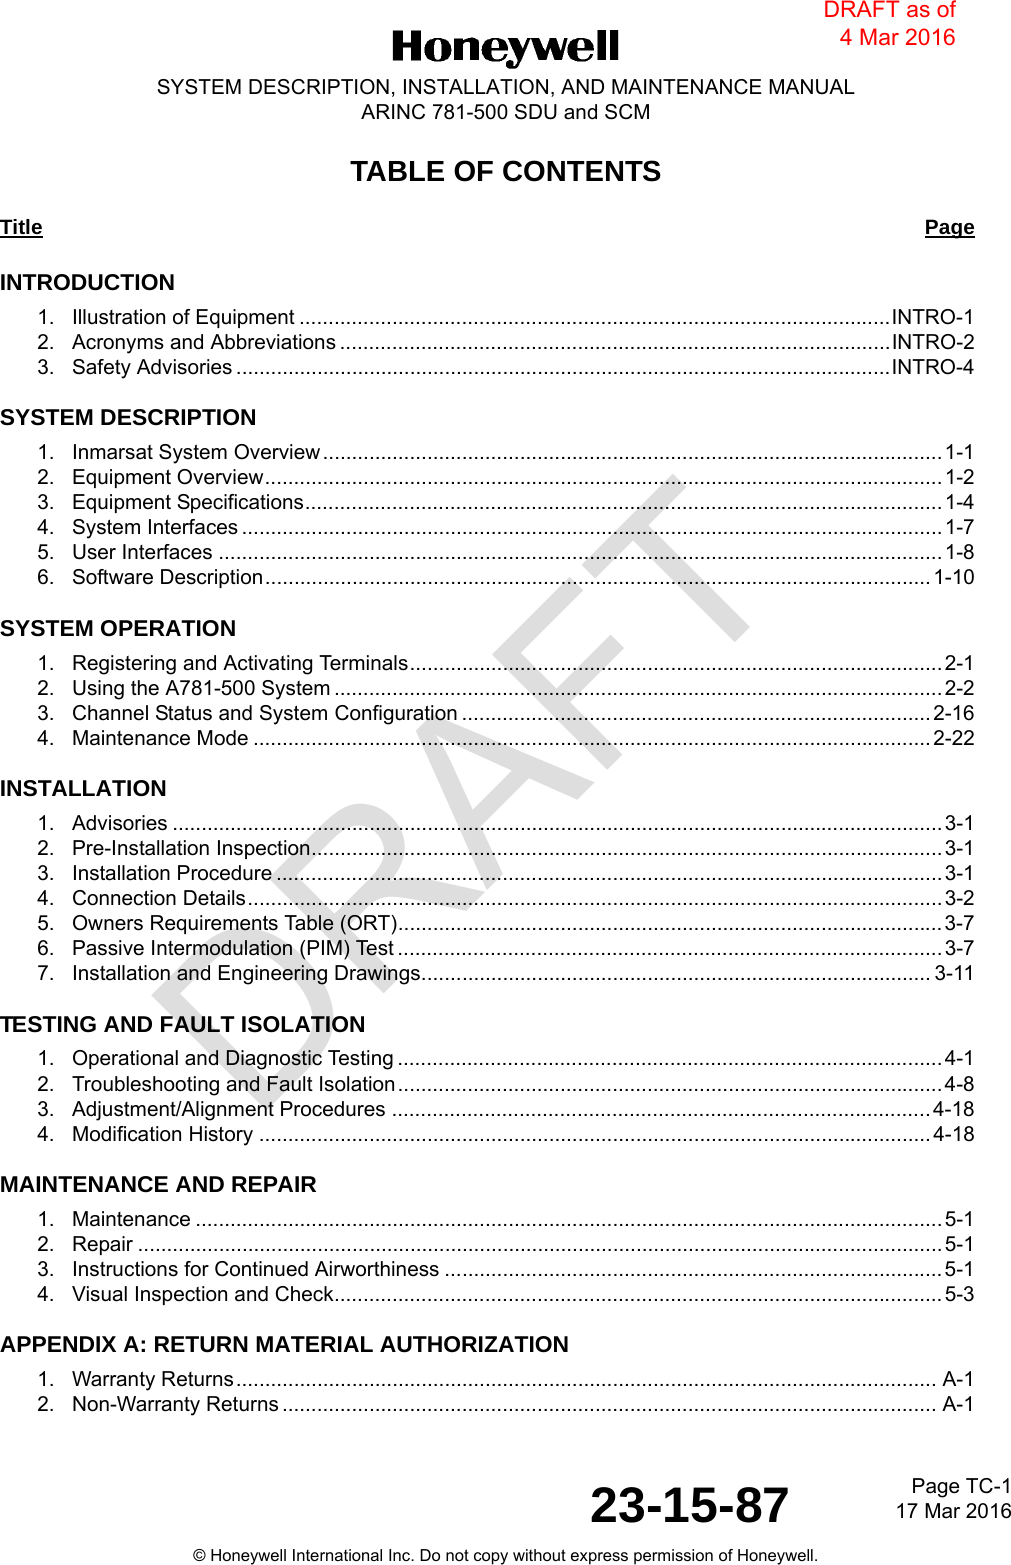 DRAFTPage TC-117 Mar 201623-15-87SYSTEM DESCRIPTION, INSTALLATION, AND MAINTENANCE MANUALARINC 781-500 SDU and SCM© Honeywell International Inc. Do not copy without express permission of Honeywell.TABLE OF CONTENTSTitle PageINTRODUCTION1.   Illustration of Equipment ......................................................................................................INTRO-12.   Acronyms and Abbreviations ...............................................................................................INTRO-23.   Safety Advisories .................................................................................................................INTRO-4SYSTEM DESCRIPTION1.   Inmarsat System Overview ........................................................................................................... 1-12.   Equipment Overview..................................................................................................................... 1-23.   Equipment Specifications.............................................................................................................. 1-44.   System Interfaces ......................................................................................................................... 1-75.   User Interfaces ............................................................................................................................. 1-86.   Software Description...................................................................................................................1-10SYSTEM OPERATION1.   Registering and Activating Terminals............................................................................................2-12.   Using the A781-500 System .........................................................................................................2-23.   Channel Status and System Configuration ................................................................................. 2-164.   Maintenance Mode ..................................................................................................................... 2-22INSTALLATION1.   Advisories ..................................................................................................................................... 3-12.   Pre-Installation Inspection............................................................................................................. 3-13.   Installation Procedure ................................................................................................................... 3-14.   Connection Details........................................................................................................................ 3-25.   Owners Requirements Table (ORT)..............................................................................................3-76.   Passive Intermodulation (PIM) Test .............................................................................................. 3-77.   Installation and Engineering Drawings........................................................................................ 3-11TESTING AND FAULT ISOLATION1.   Operational and Diagnostic Testing .............................................................................................. 4-12.   Troubleshooting and Fault Isolation..............................................................................................4-83.   Adjustment/Alignment Procedures .............................................................................................4-184.   Modification History ....................................................................................................................4-18MAINTENANCE AND REPAIR1.   Maintenance .................................................................................................................................5-12.   Repair ........................................................................................................................................... 5-13.   Instructions for Continued Airworthiness ......................................................................................5-14.   Visual Inspection and Check.........................................................................................................5-3APPENDIX A: RETURN MATERIAL AUTHORIZATION1.   Warranty Returns......................................................................................................................... A-12.   Non-Warranty Returns ................................................................................................................. A-1DRAFT as of 4 Mar 2016